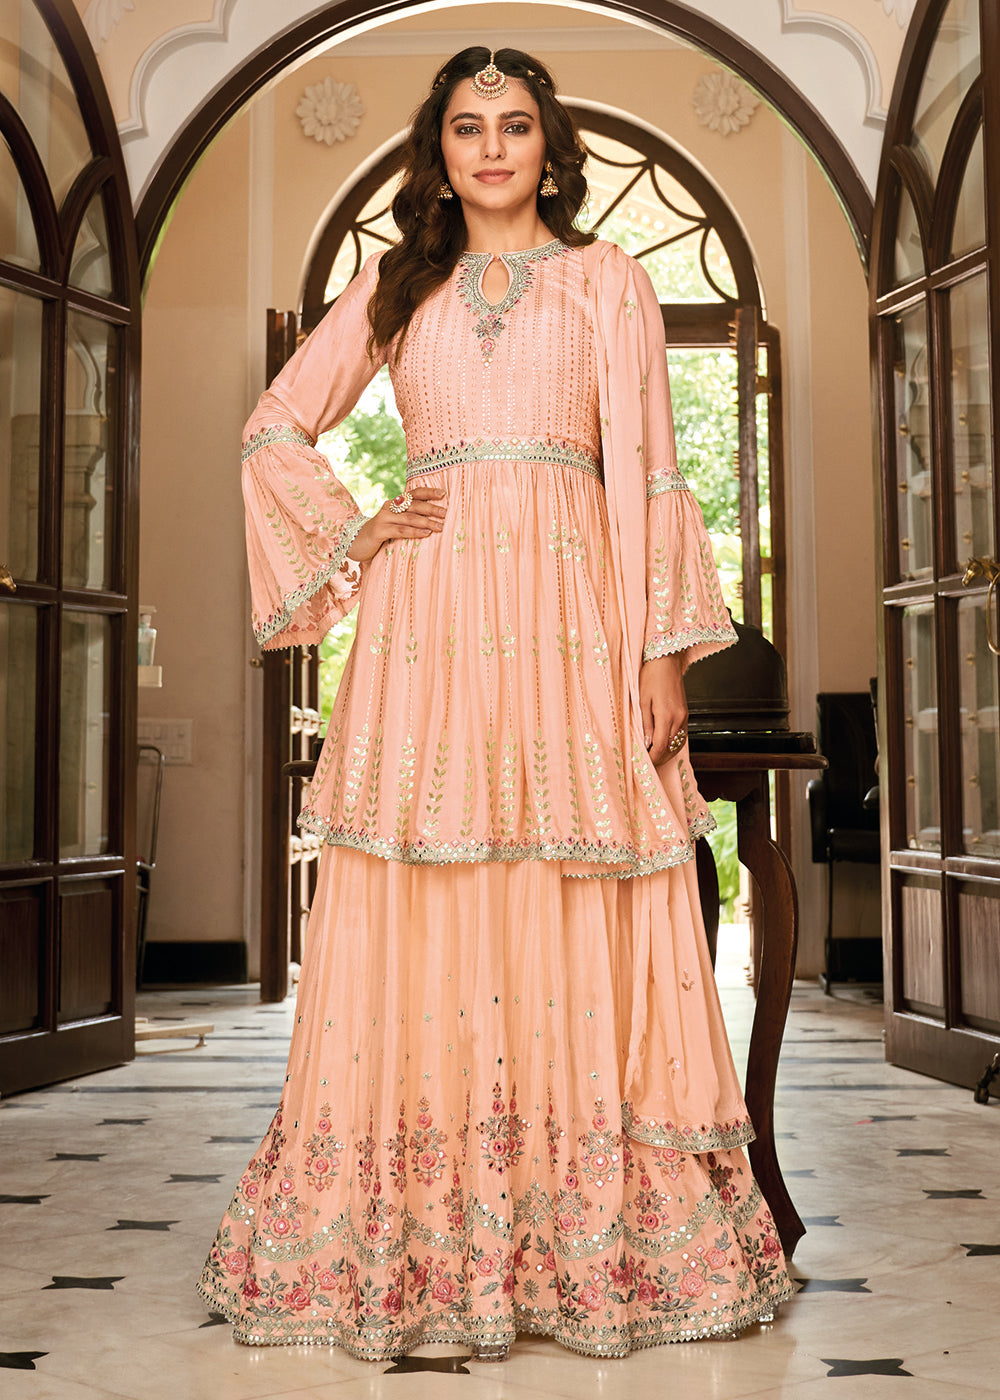 Buy Now Sharara Top Style Peach Heavy Chinon Lehenga Skirt Suit Online in USA, UK, Canada & Worldwide at Empress Clothing.